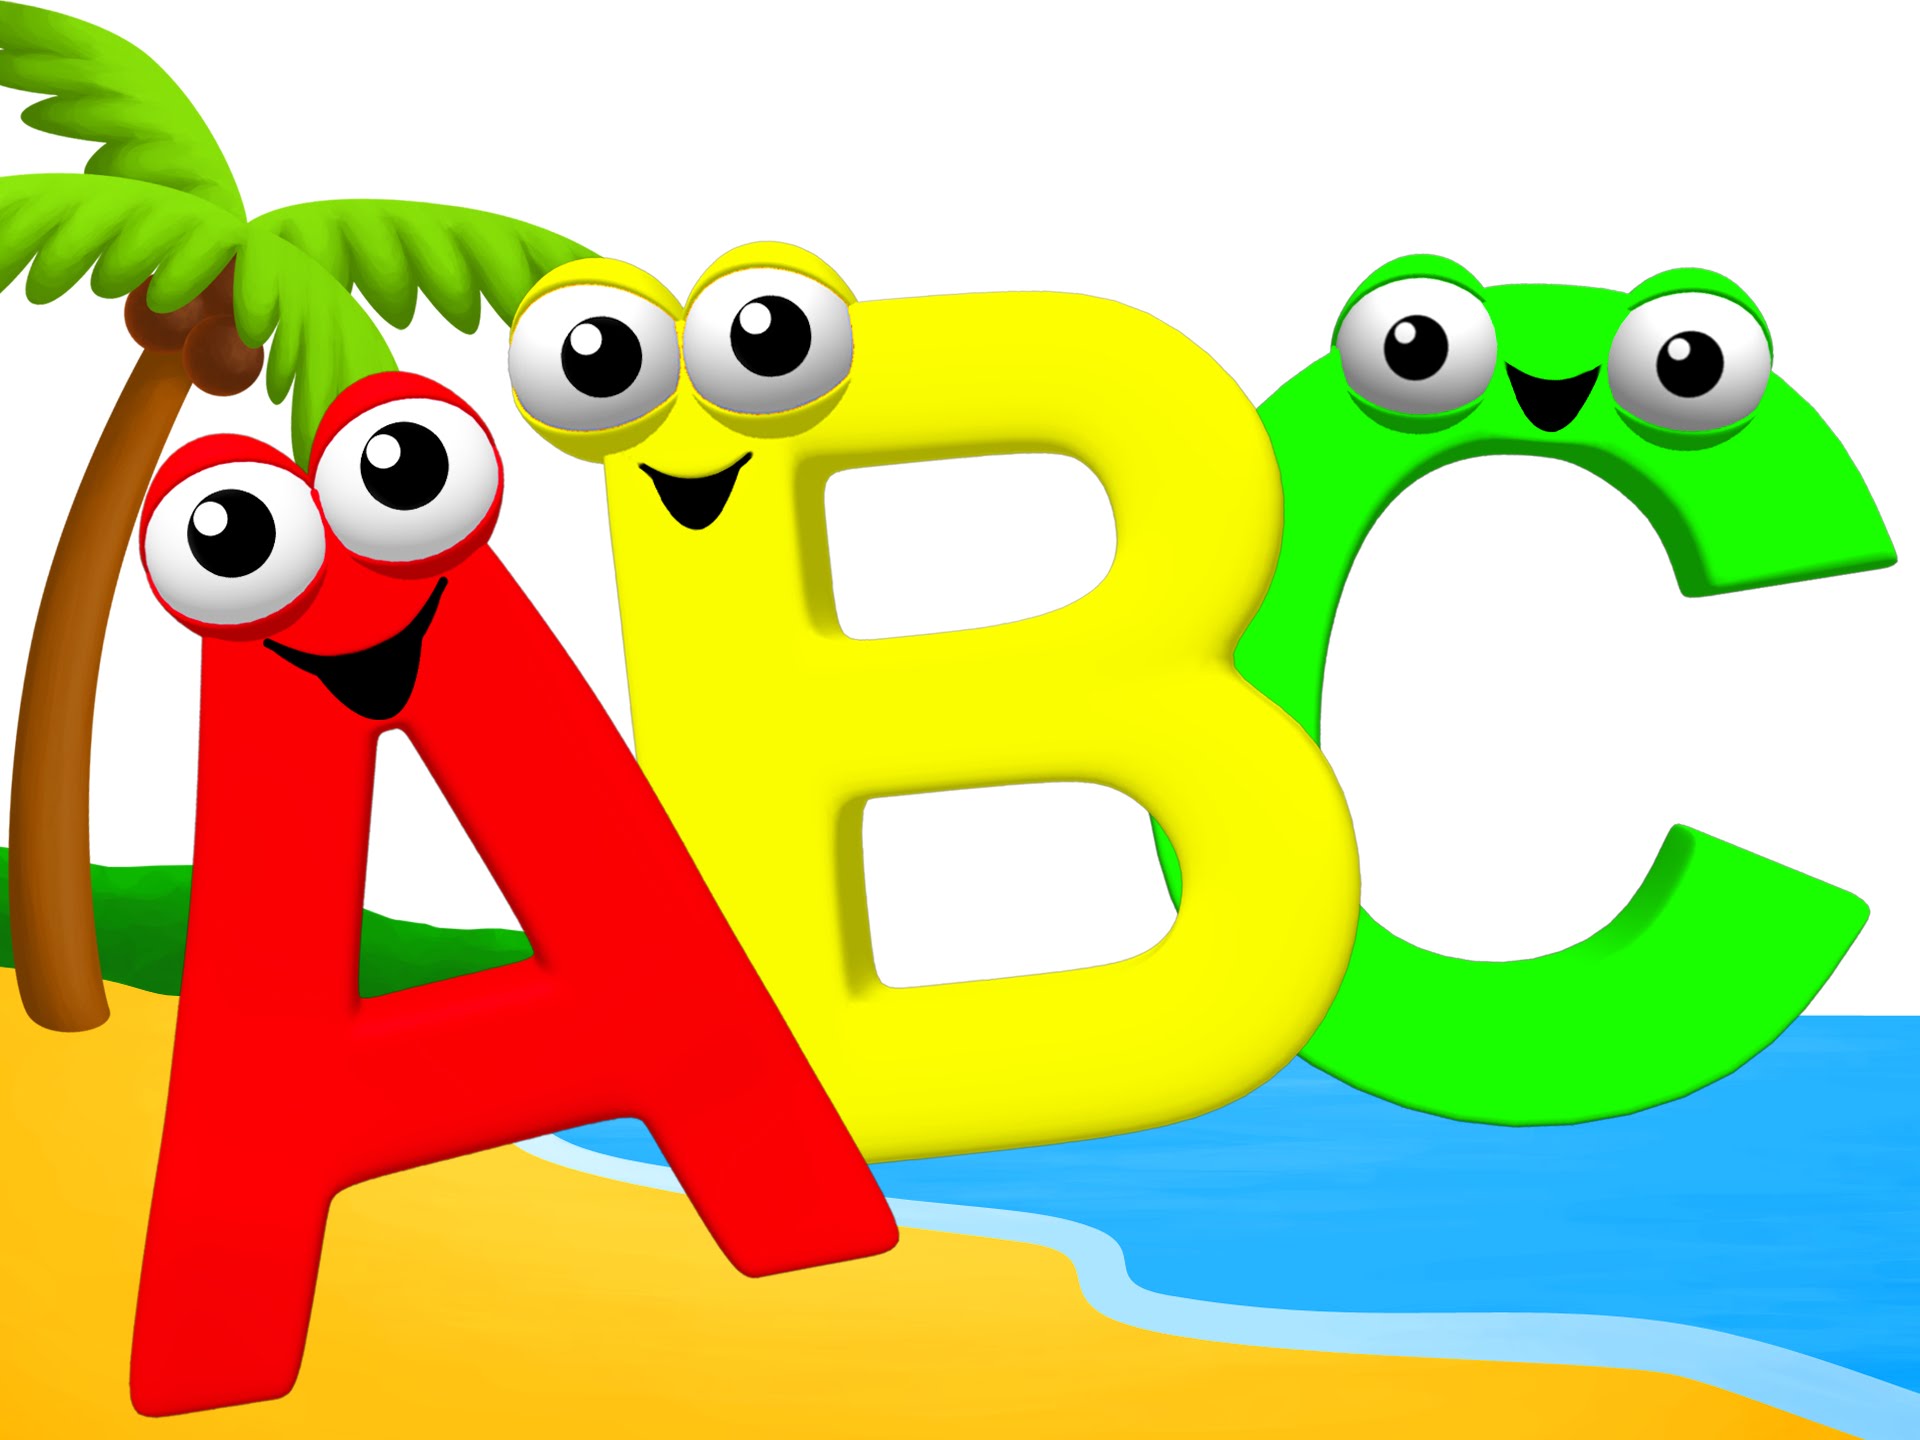 Letters of the Alphabet" & More | ABC Toddler Collection, Kids 3D ...